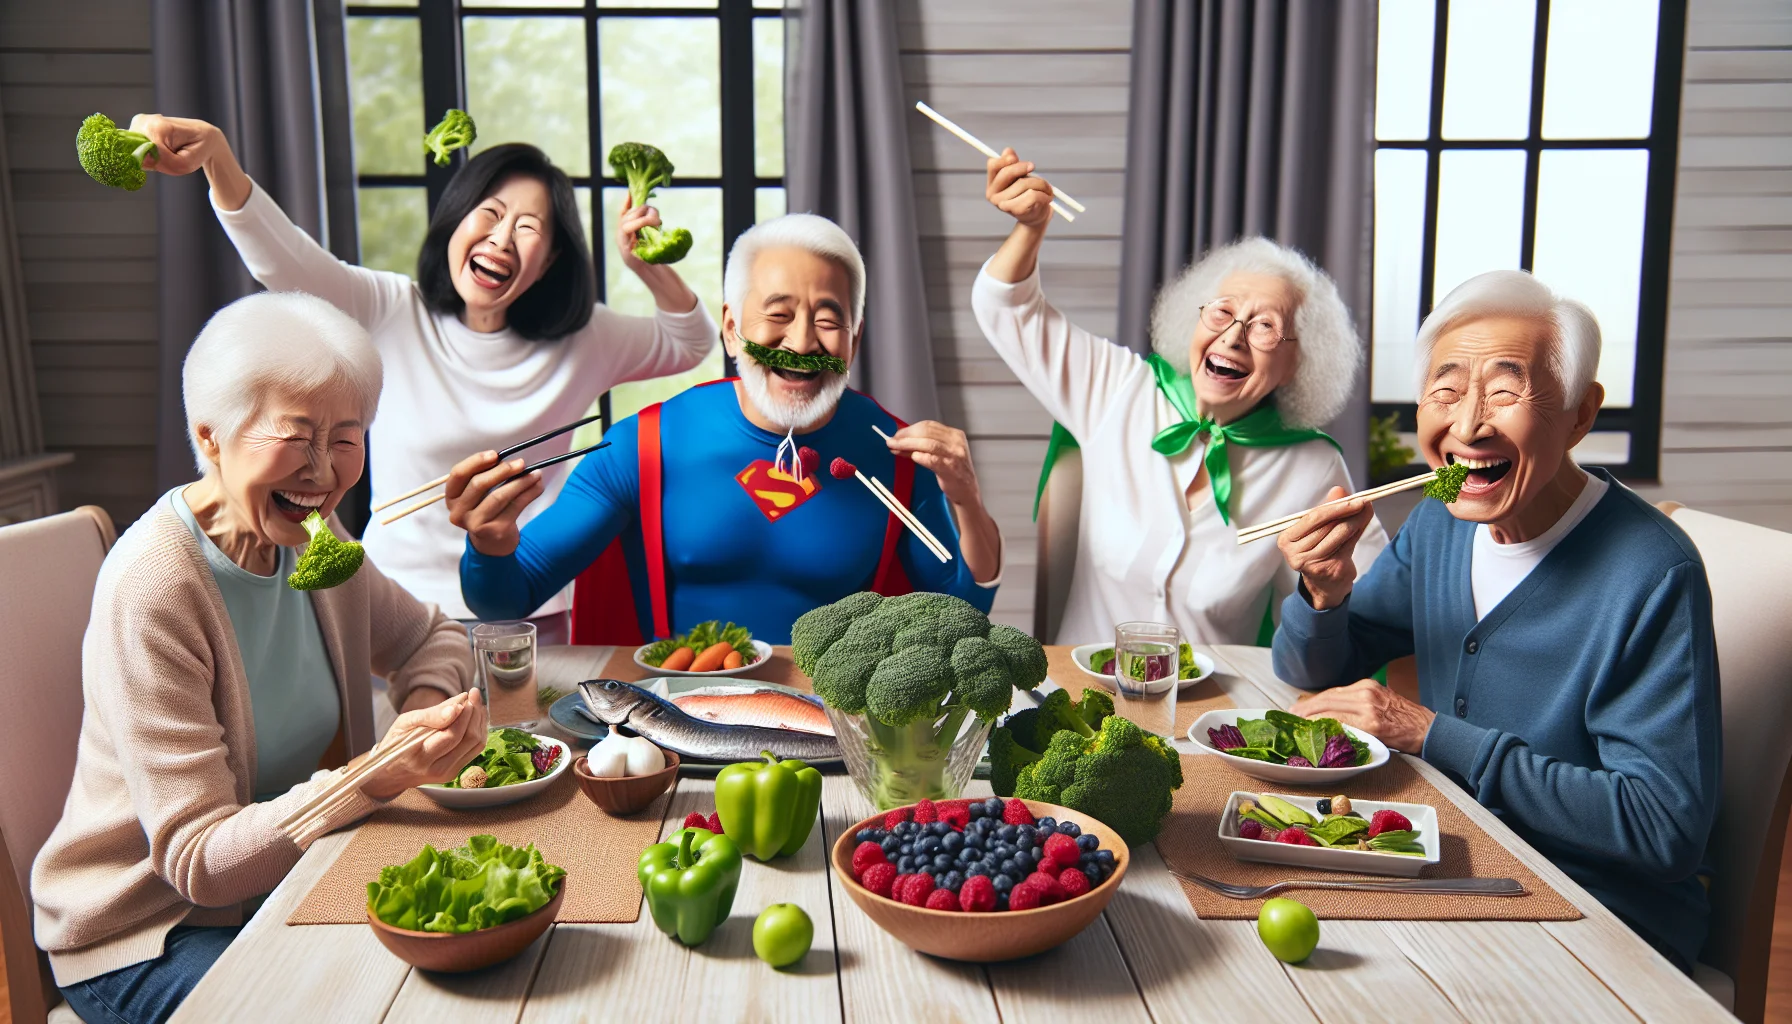 Create an engaging and humorous scene featuring four elderly individuals of different descents: Caucasian, Hispanic, Middle-Eastern, and South Asian. They are sitting around a large dining table in a brightly lit dining room, filled with laughter and light-hearted debates. On the table, they have various healthy foods like berries, green vegetables, whole grains, fatty fish, all known for their anti-inflammatory properties helping to reduce cytokines naturally. One person is trying to use chopsticks to pick up broccoli, another is posing superhero-like while holding a fish. Another is laughing heartily while salad leaves stick out of their mouth, and the last one is balancing a raspberry on their nose.